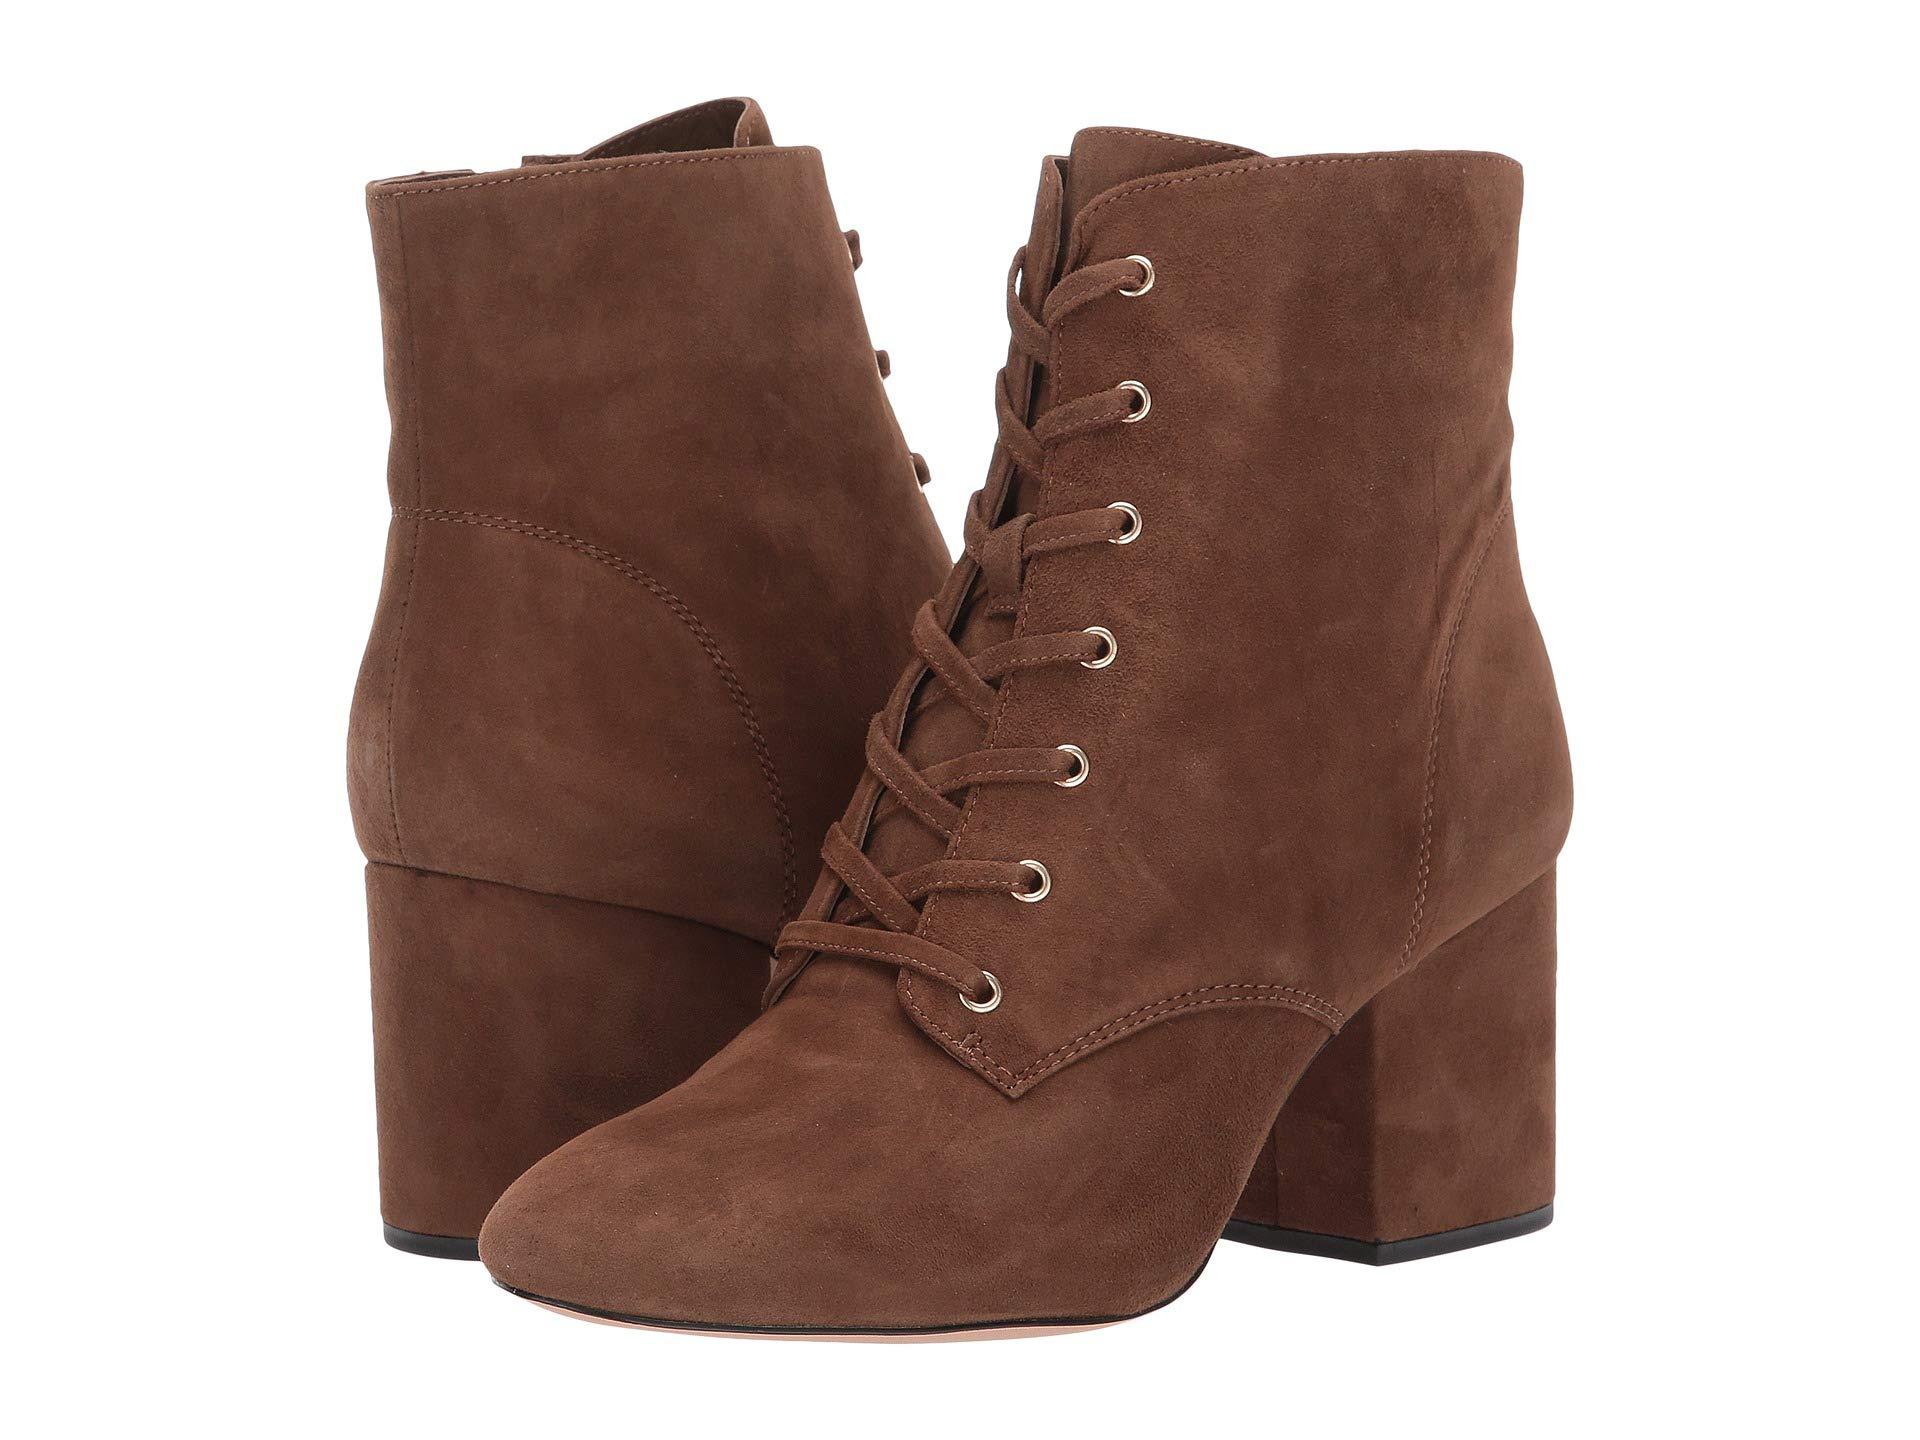 J.Crew Suede Lace-up Maya Boot in Tan (Brown) - Lyst